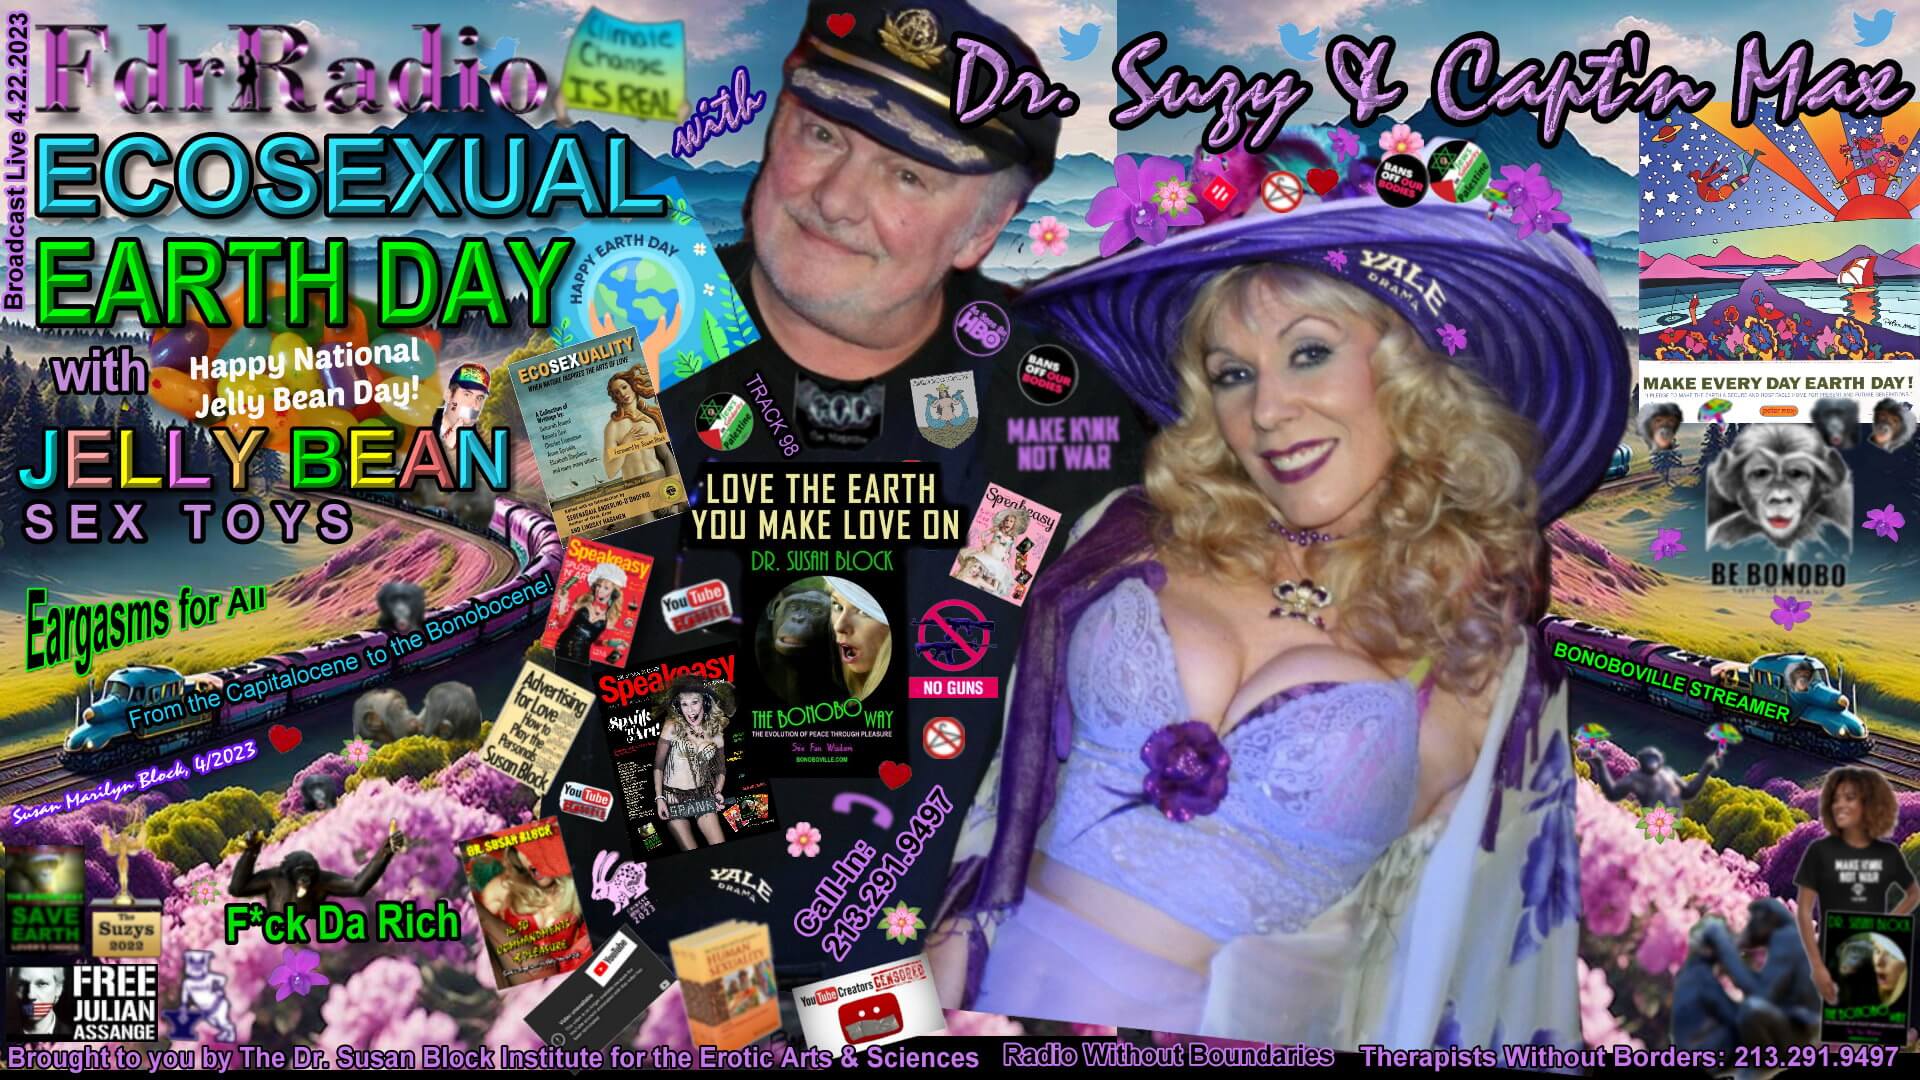 Ecosexual Earth Day +Jelly Bean Sex Toys and Politix image pic